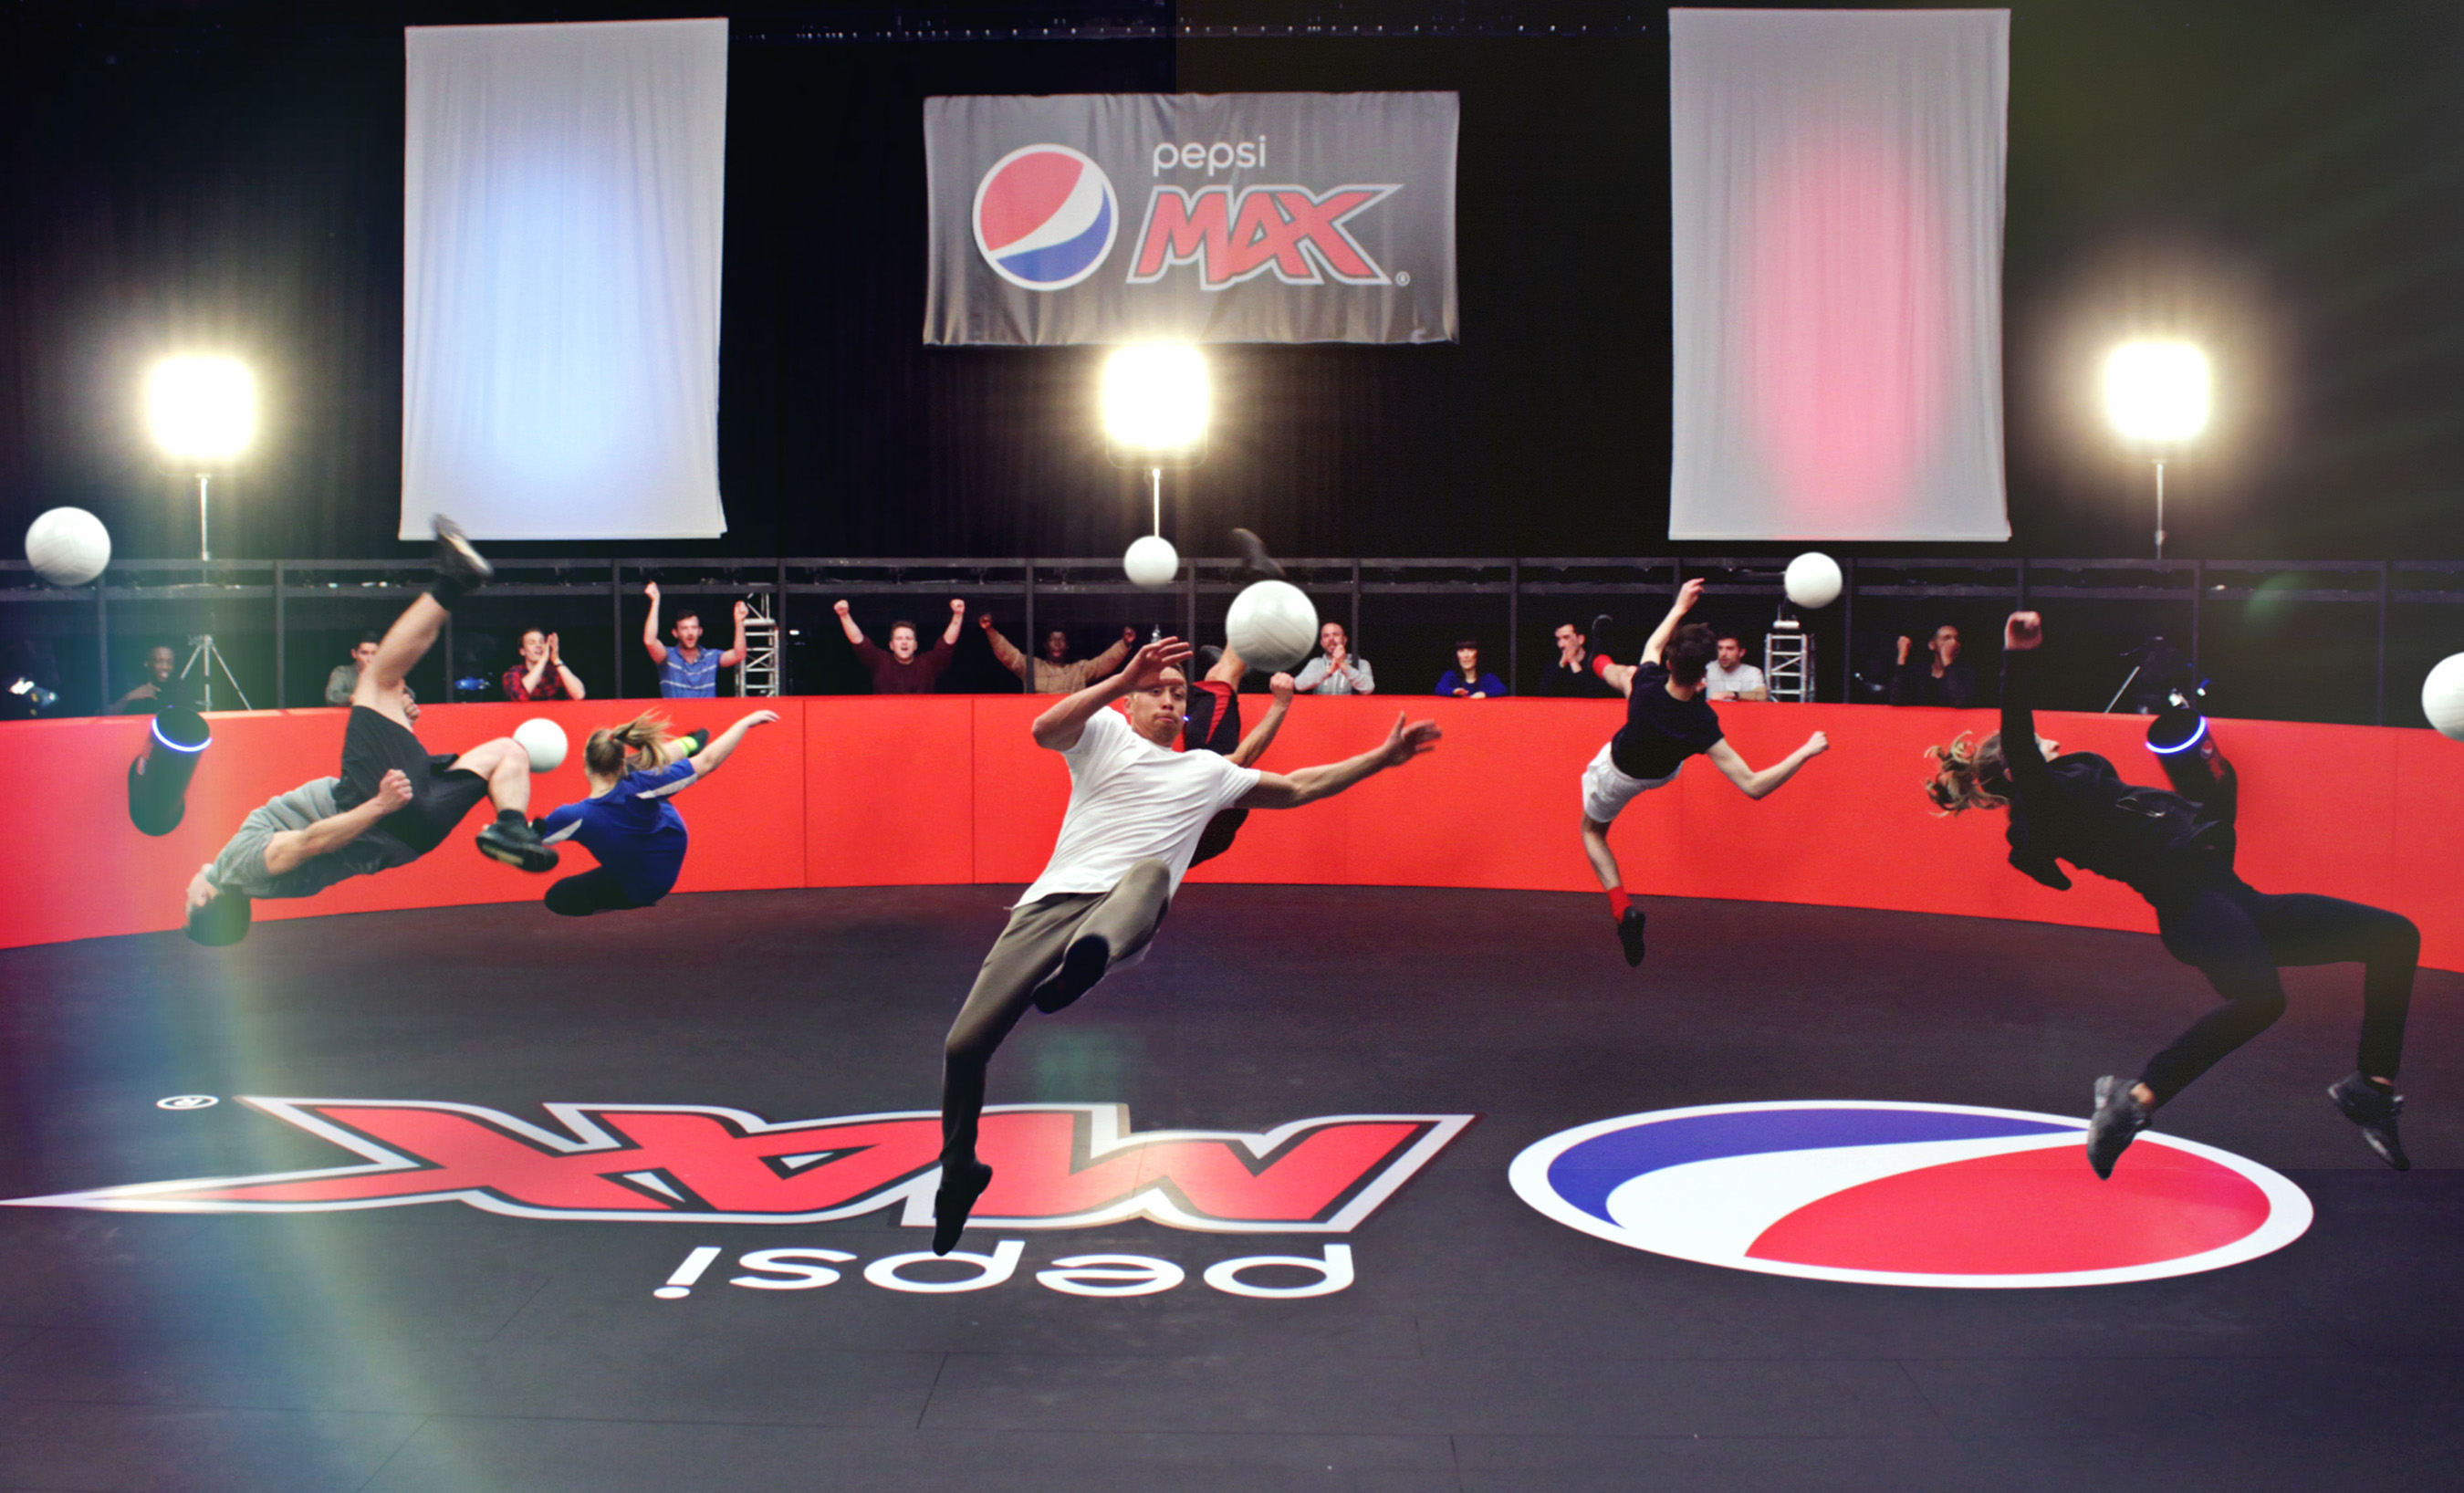 athletes-launch-the-pepsi-max-‘volley-360’-14-HR